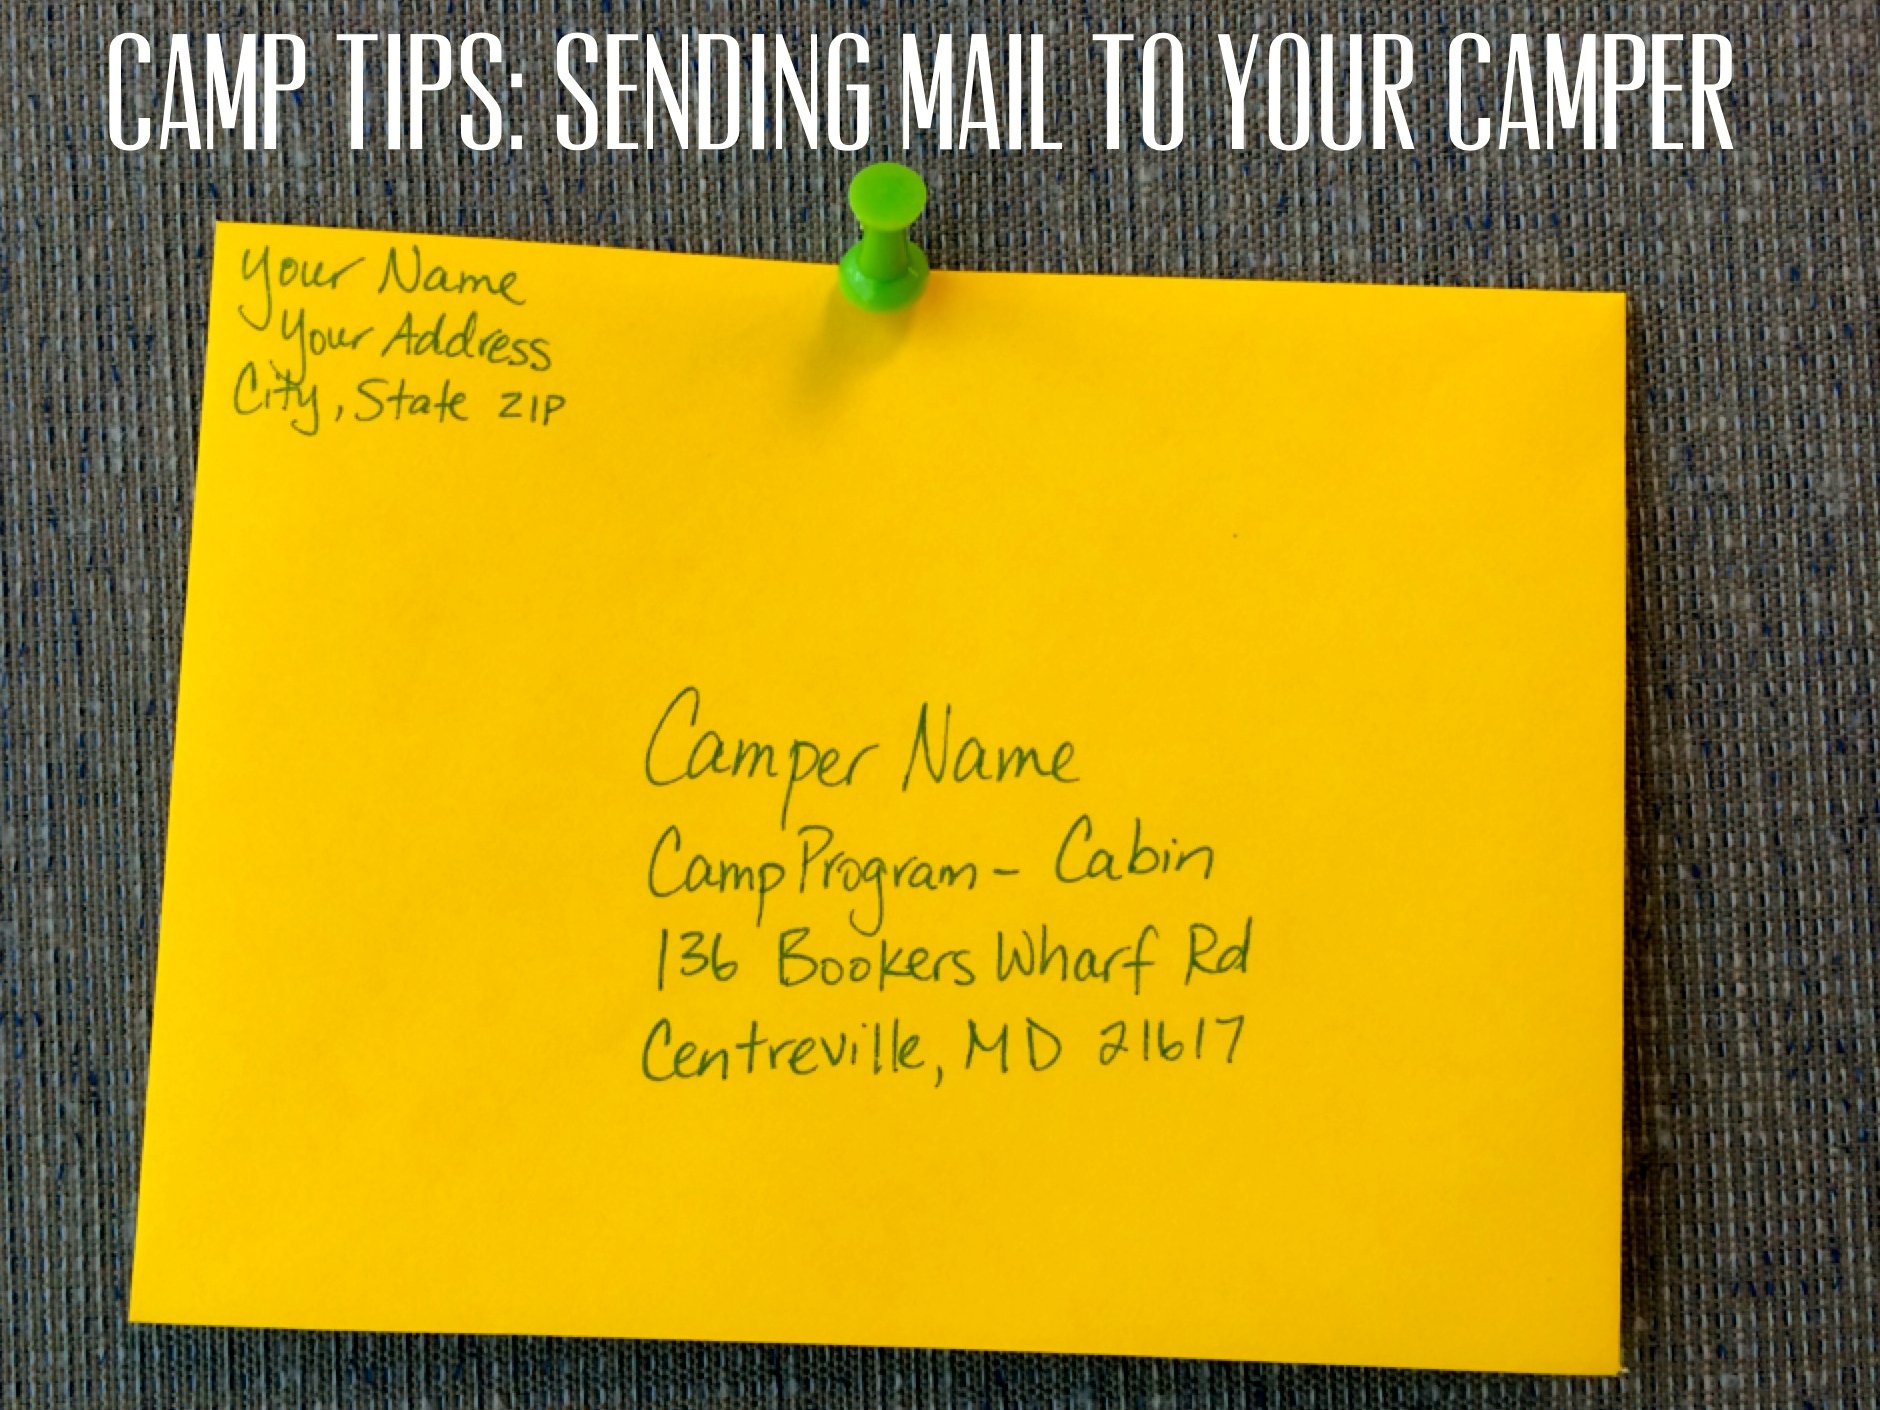 Camp Tips: Sending Mail To Your Camper